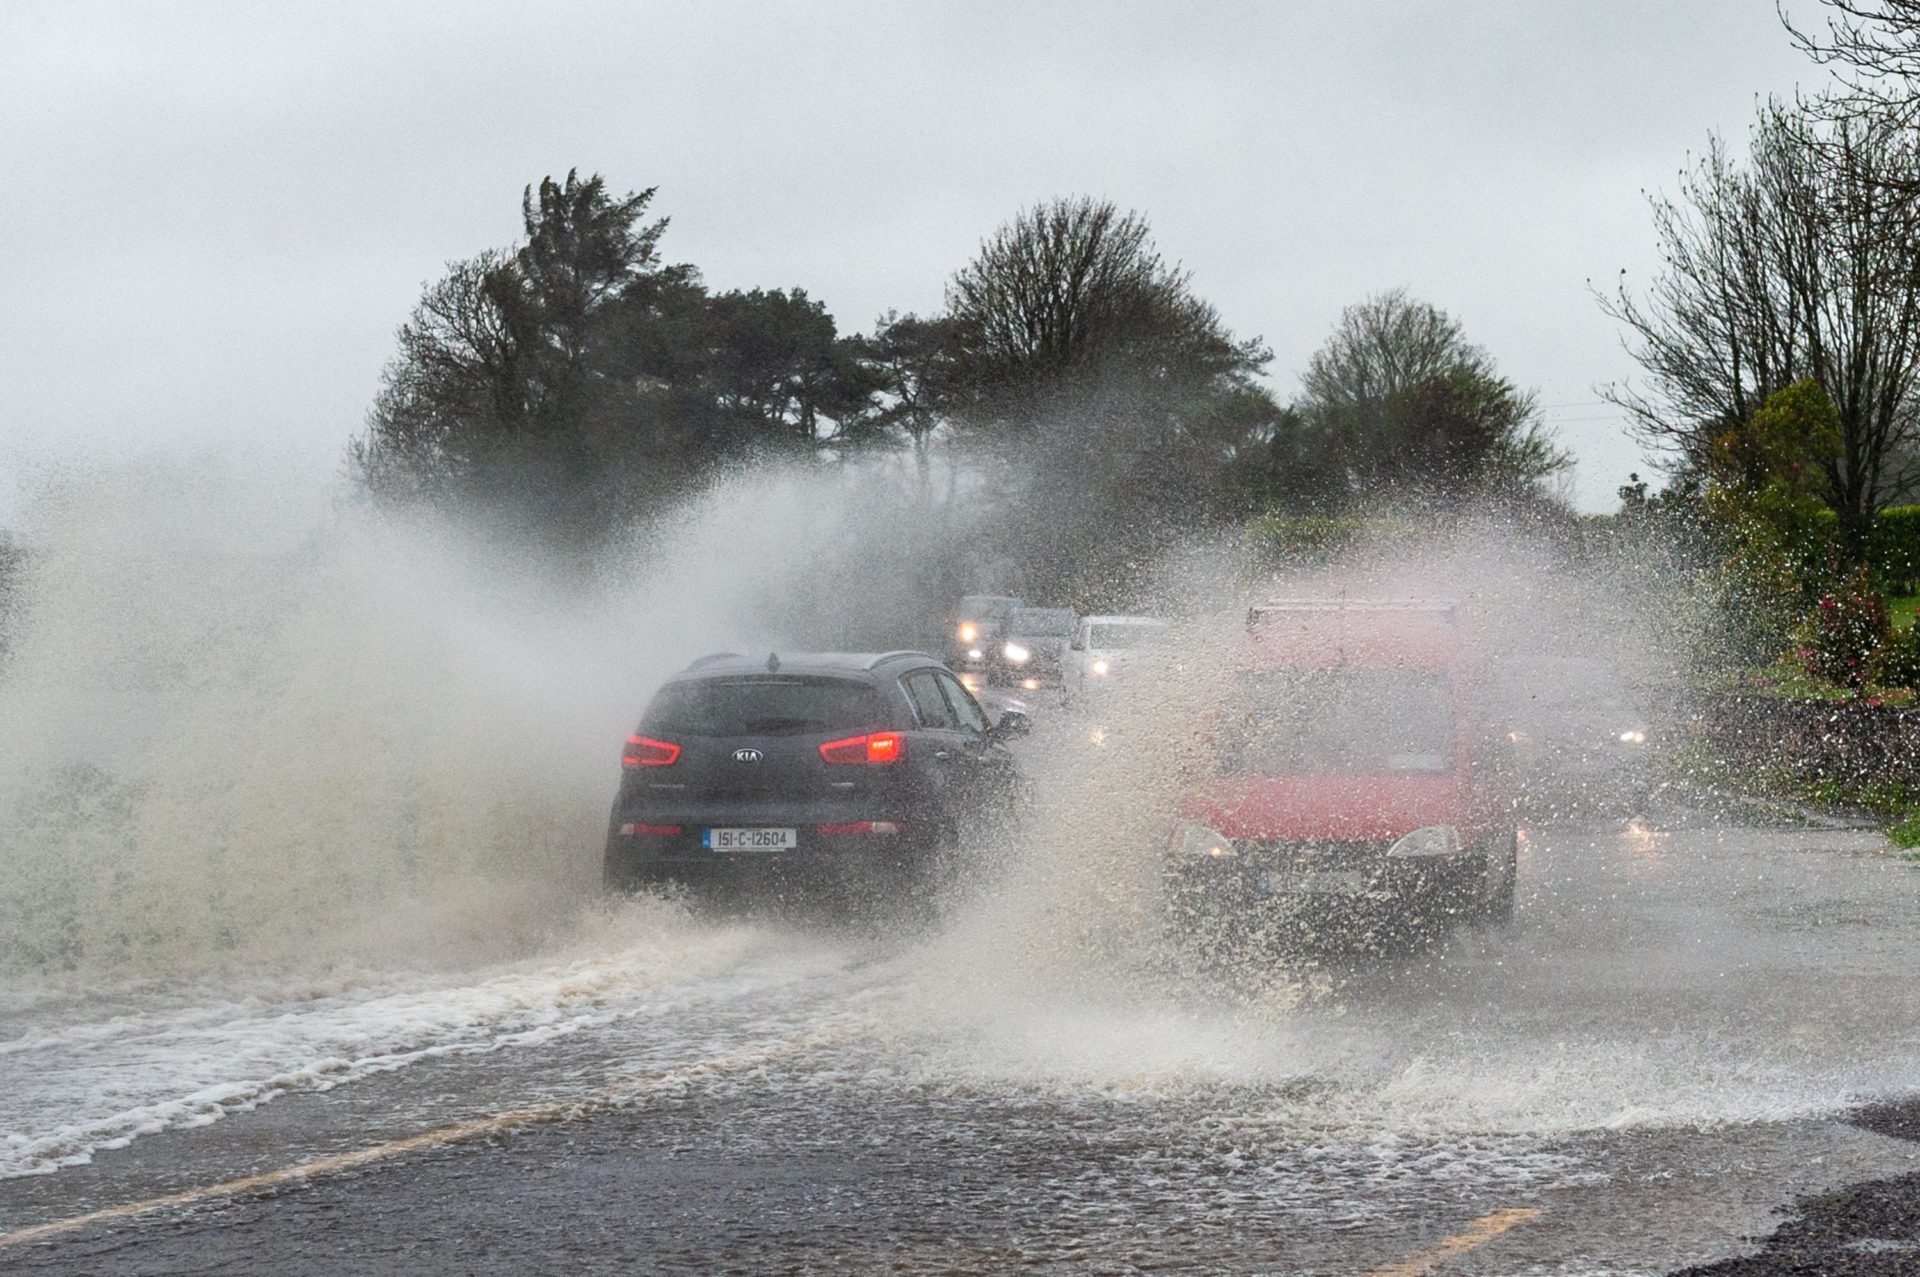 T4A1G9 Skibbereen, West Cork, Ireland. 15th Apr, 2019. Much of Ireland is currently in the midst of a Status Orange Rainfall Warning, issued by Met Eireann. Cars negotiate a spot flood on the N71 near Skibbereen. Credit: Andy Gibson/Alamy Live News